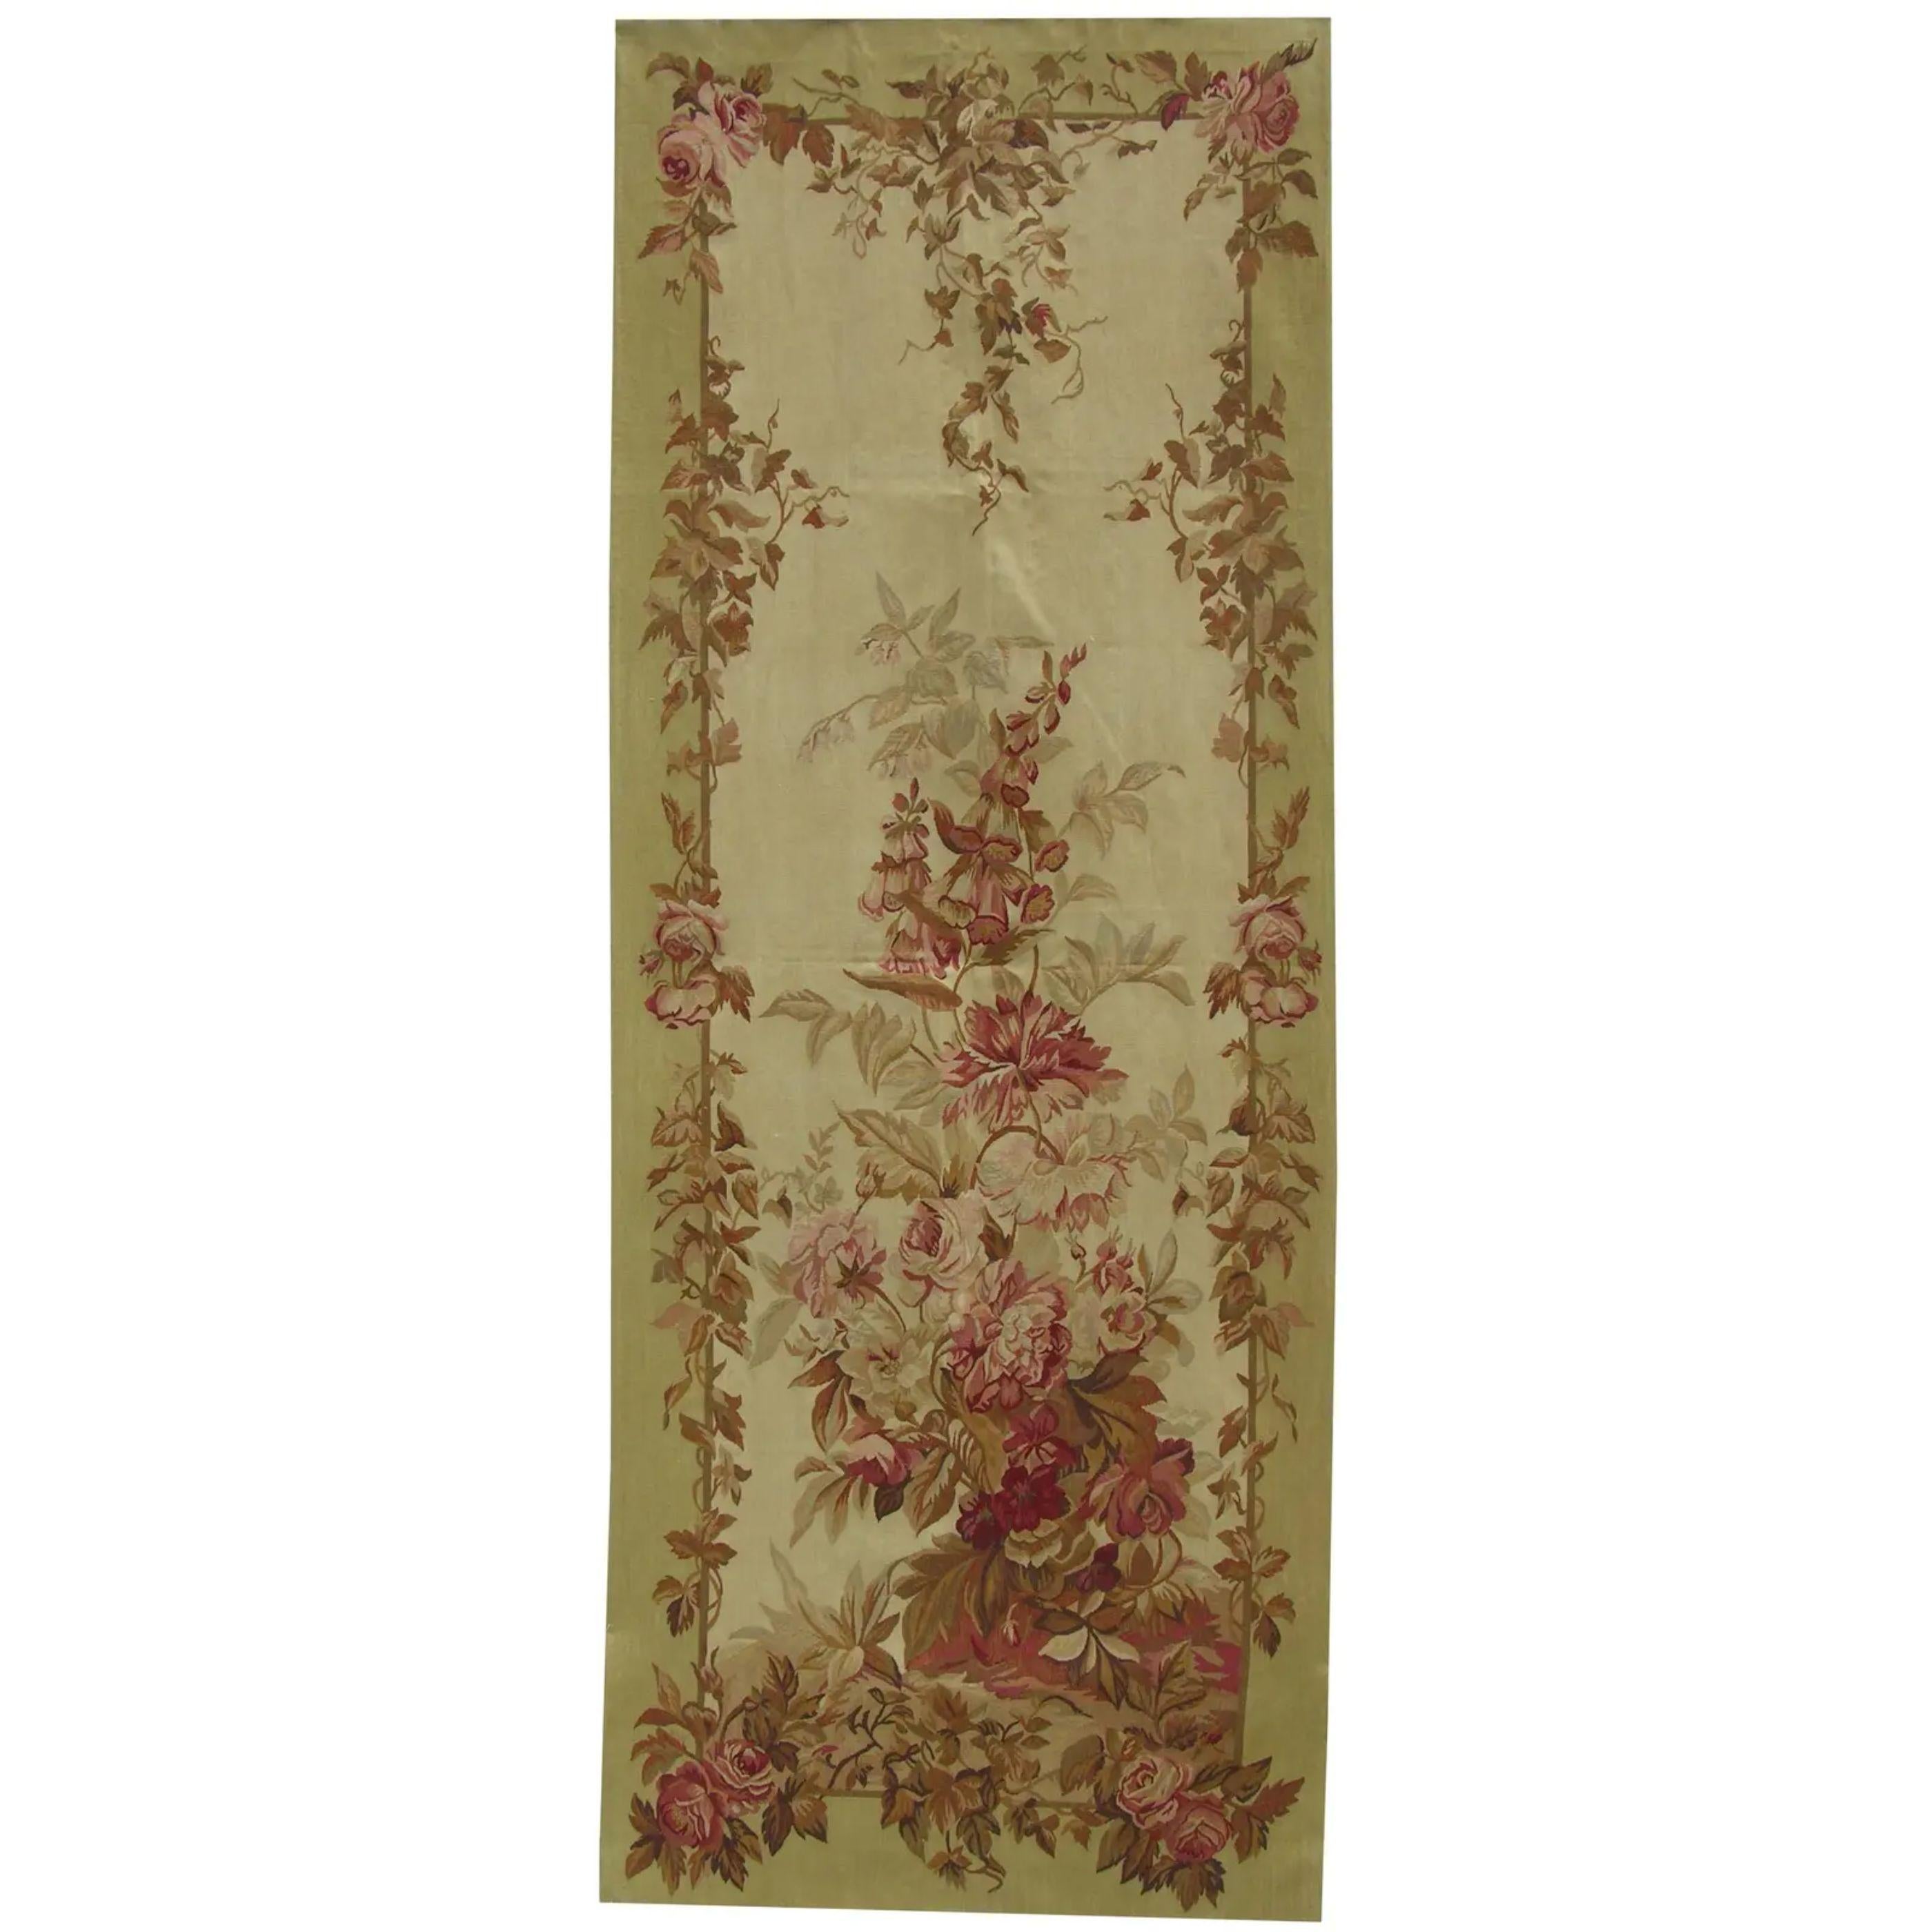 Unknown Vintage Floral Tapestry in Red & Tan 8.1X3.1 For Sale